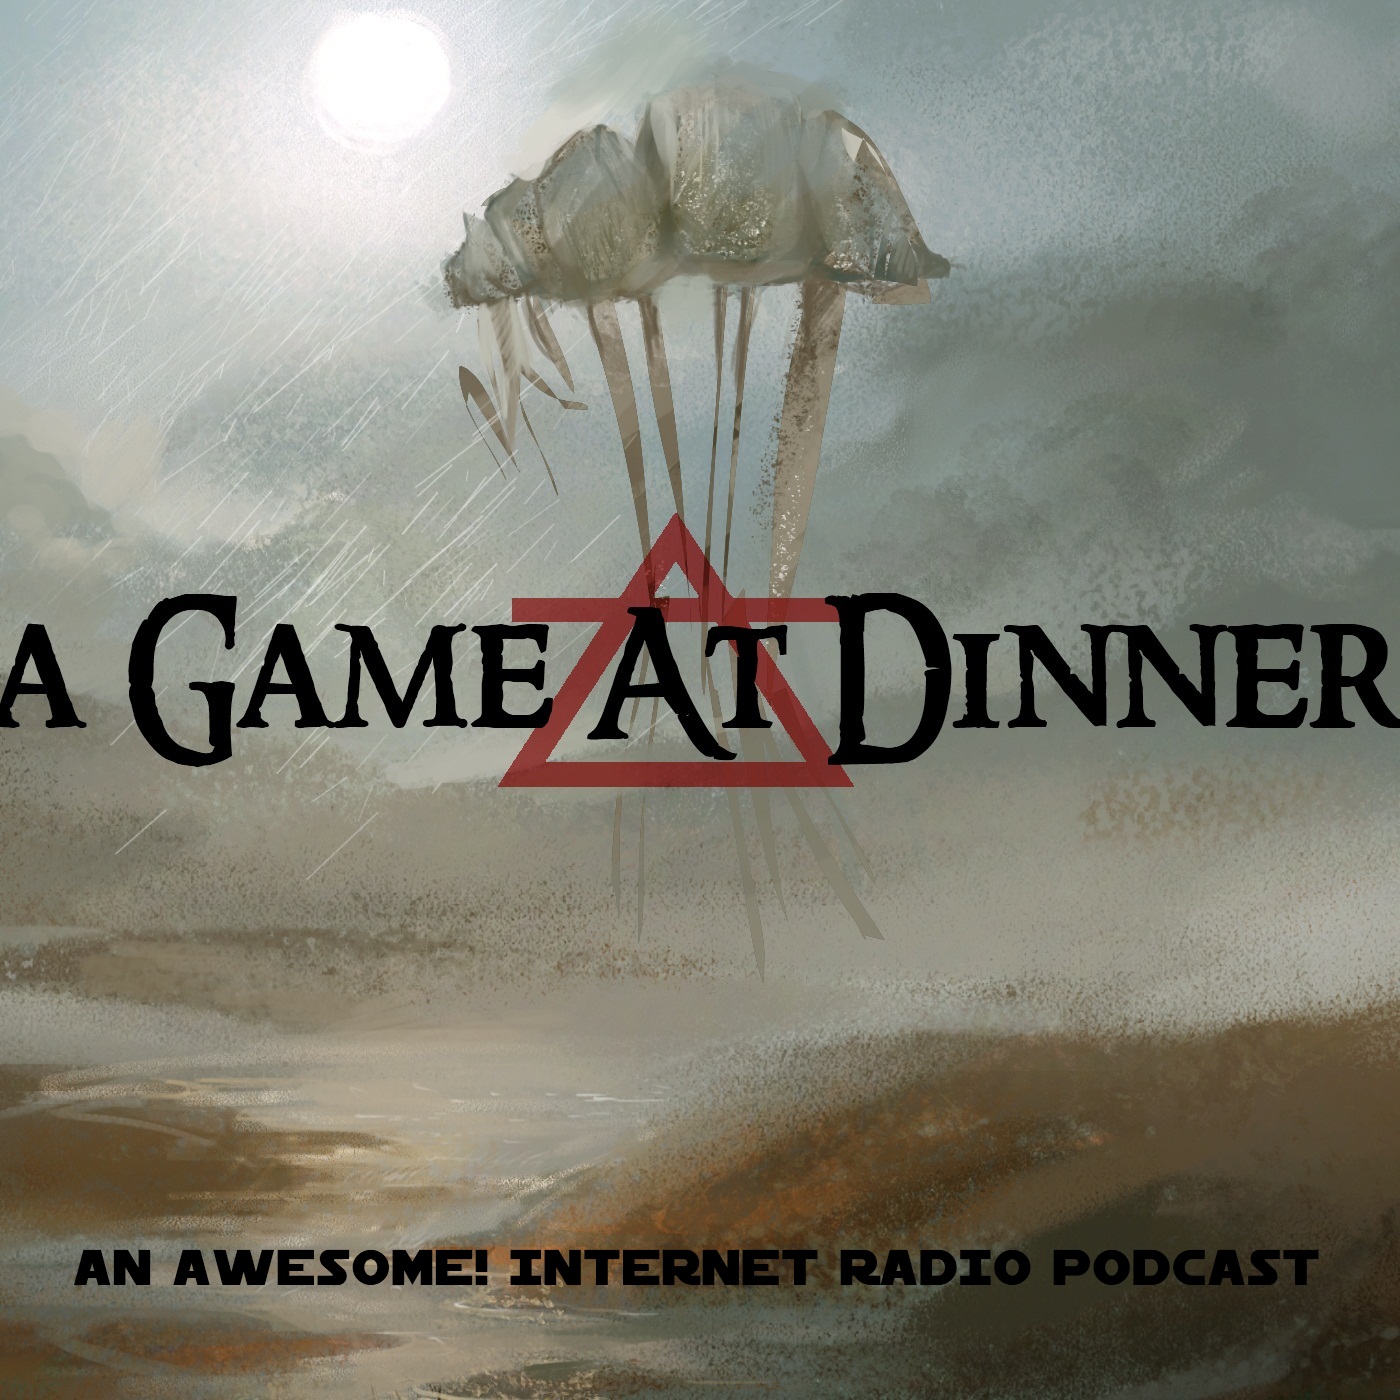 A Game at Dinner – Awesome! Internet Radio